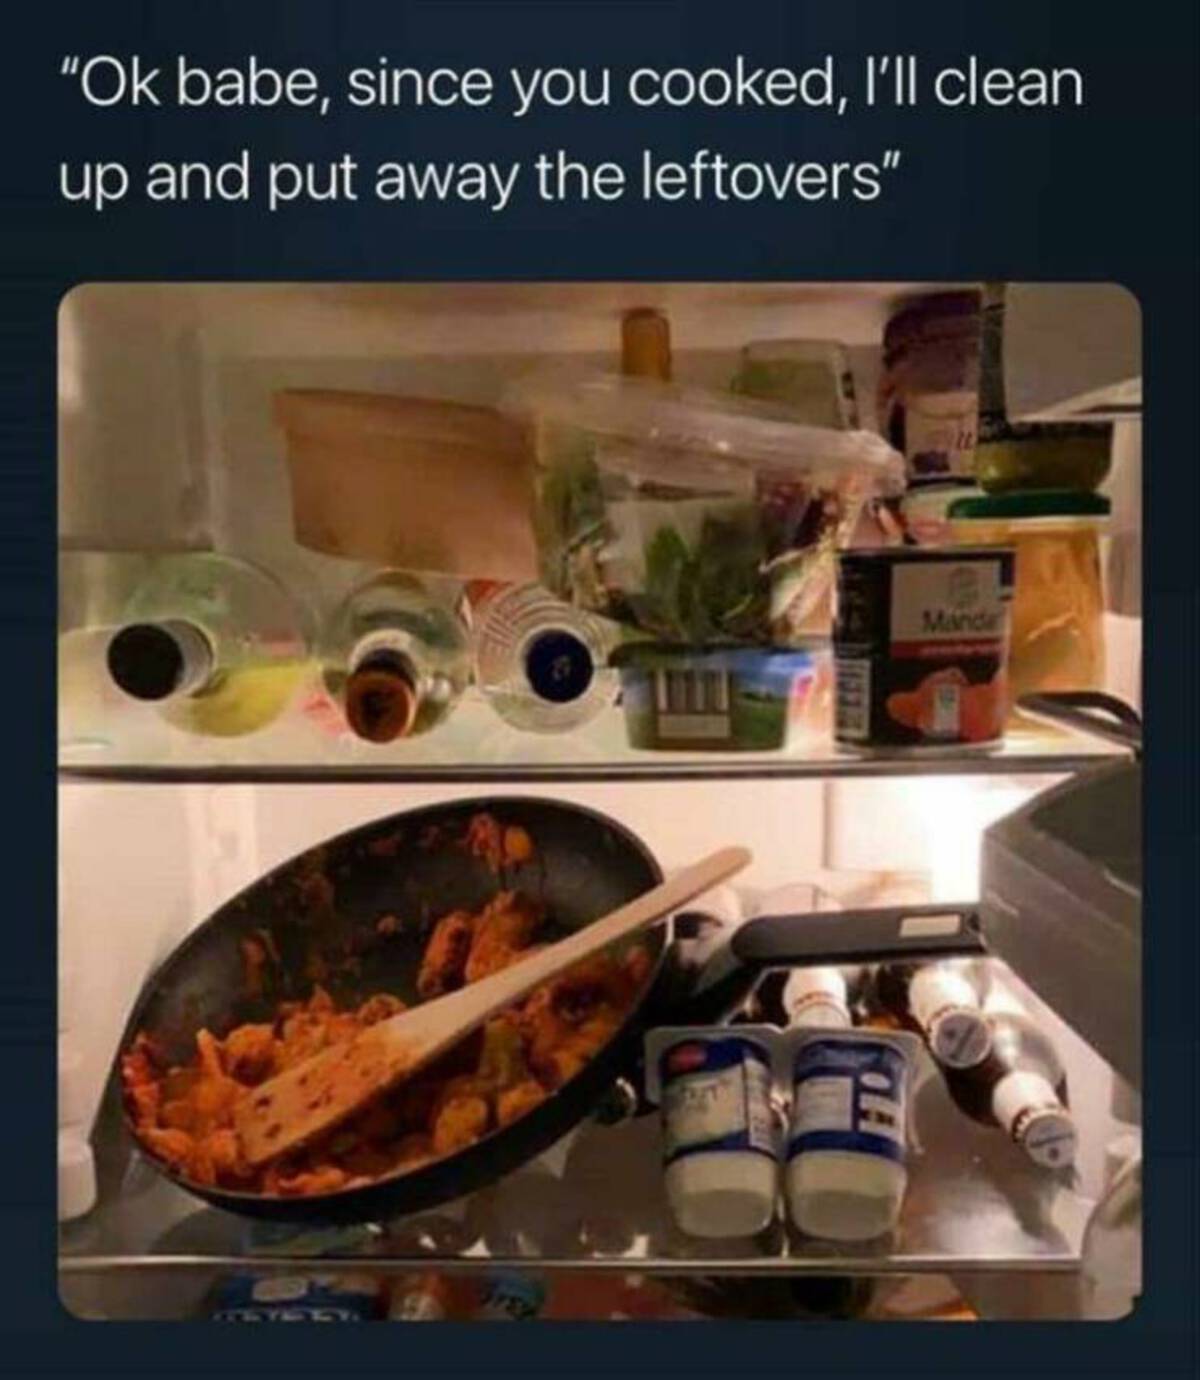 dish - "Ok babe, since you cooked, I'll clean up and put away the leftovers" Taylly Mande